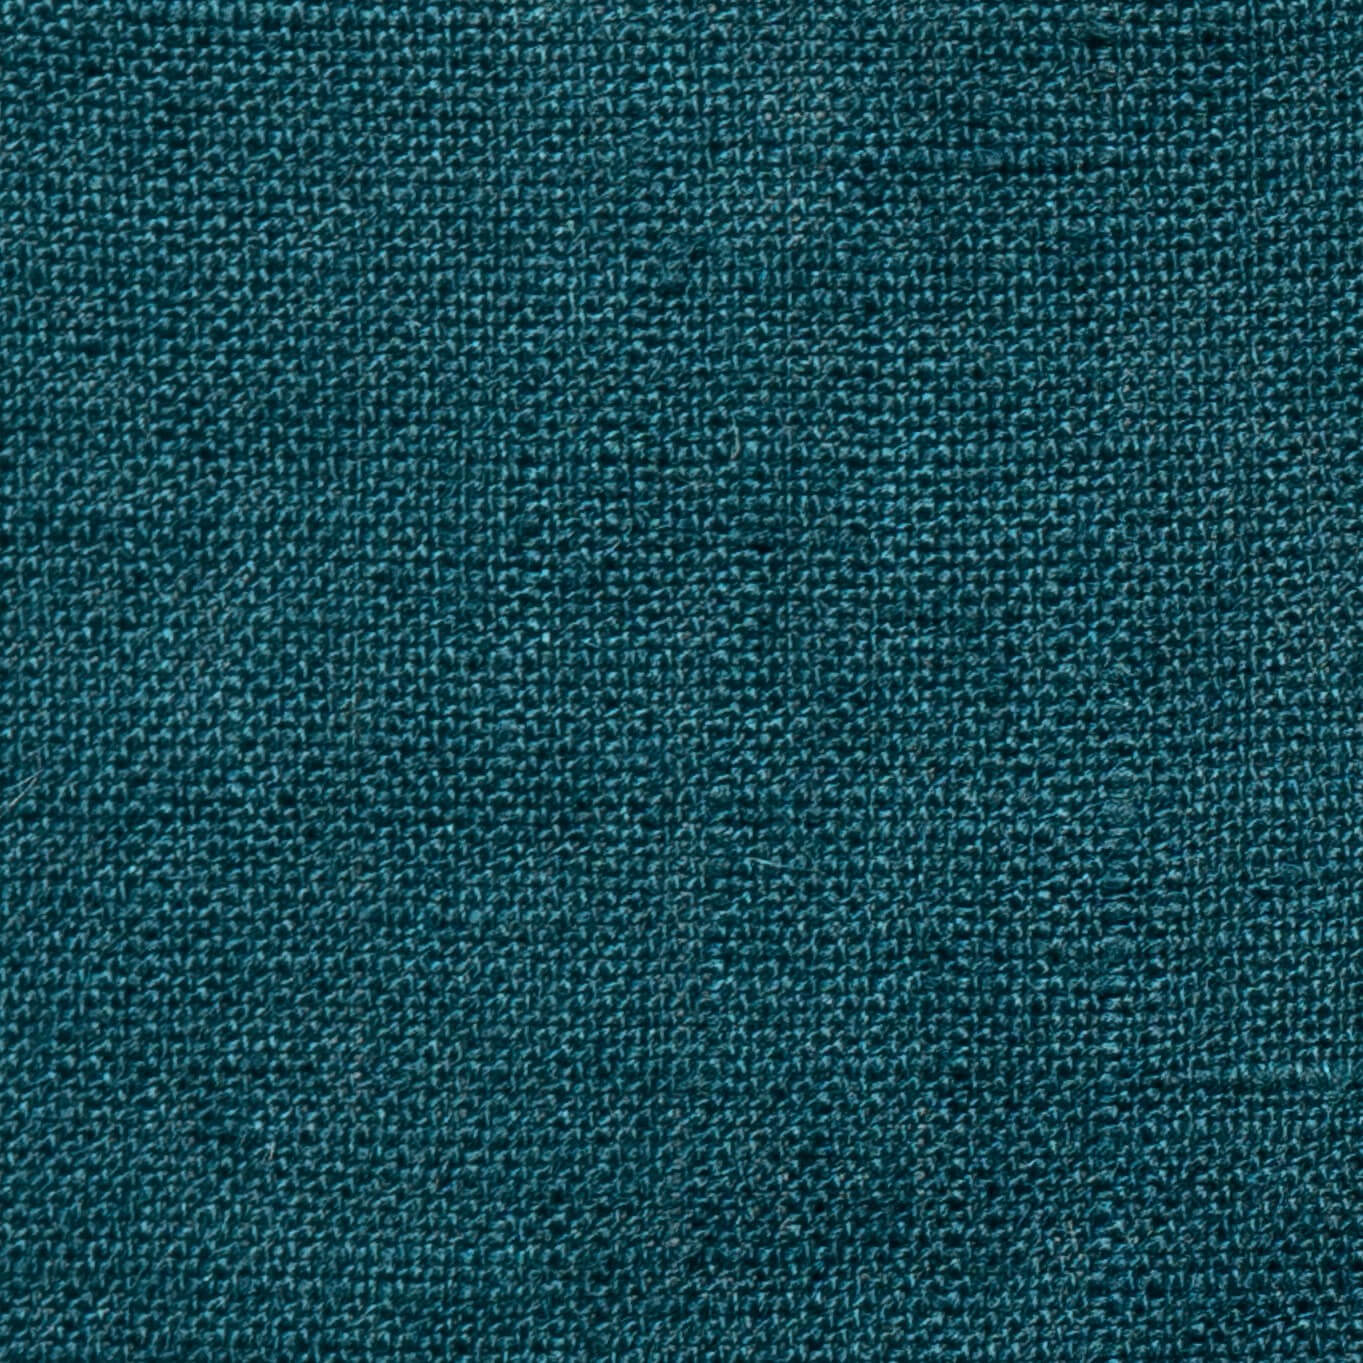 Washed Pure Deep Teal Linen Fabric 205 g/m²